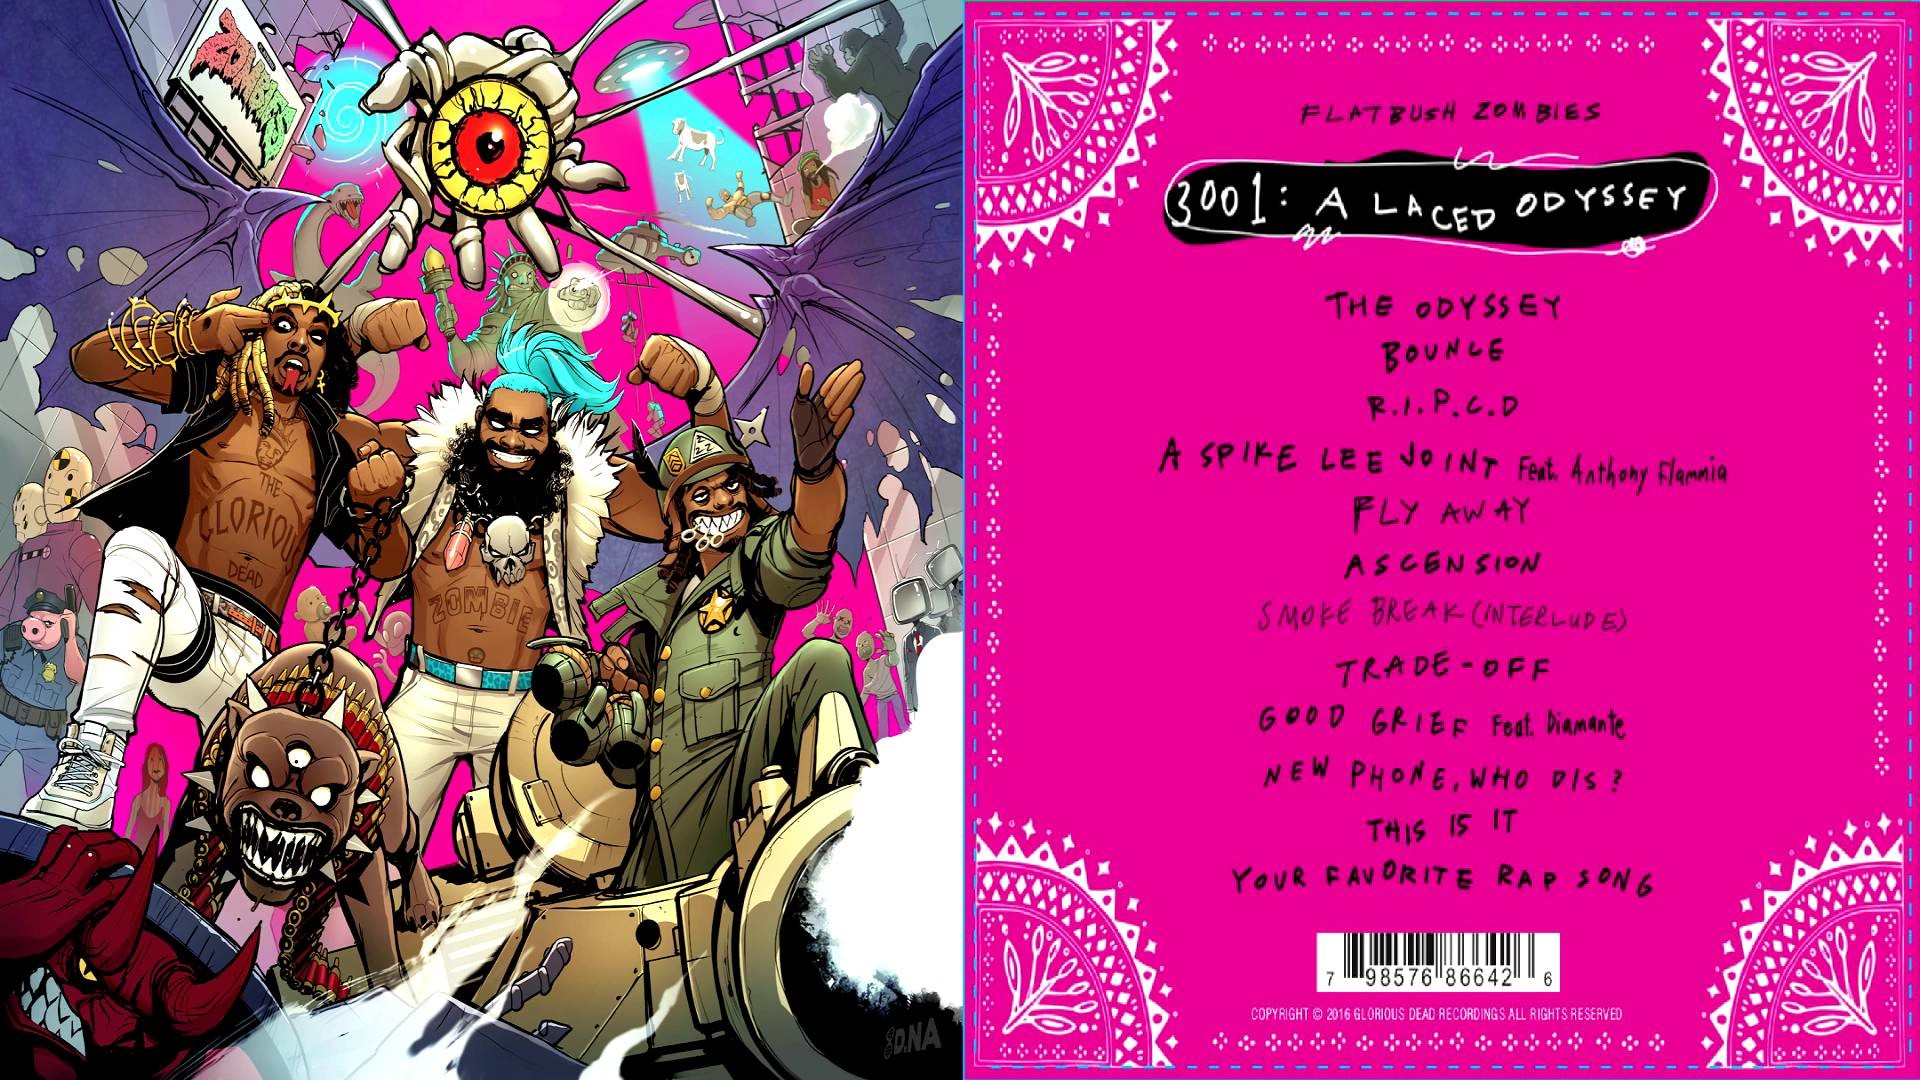 1920x1080 Flatbush ZOMBiES - The Odyssey (3001: A Laced Odyssey) [DOWNLOAD/BUY]